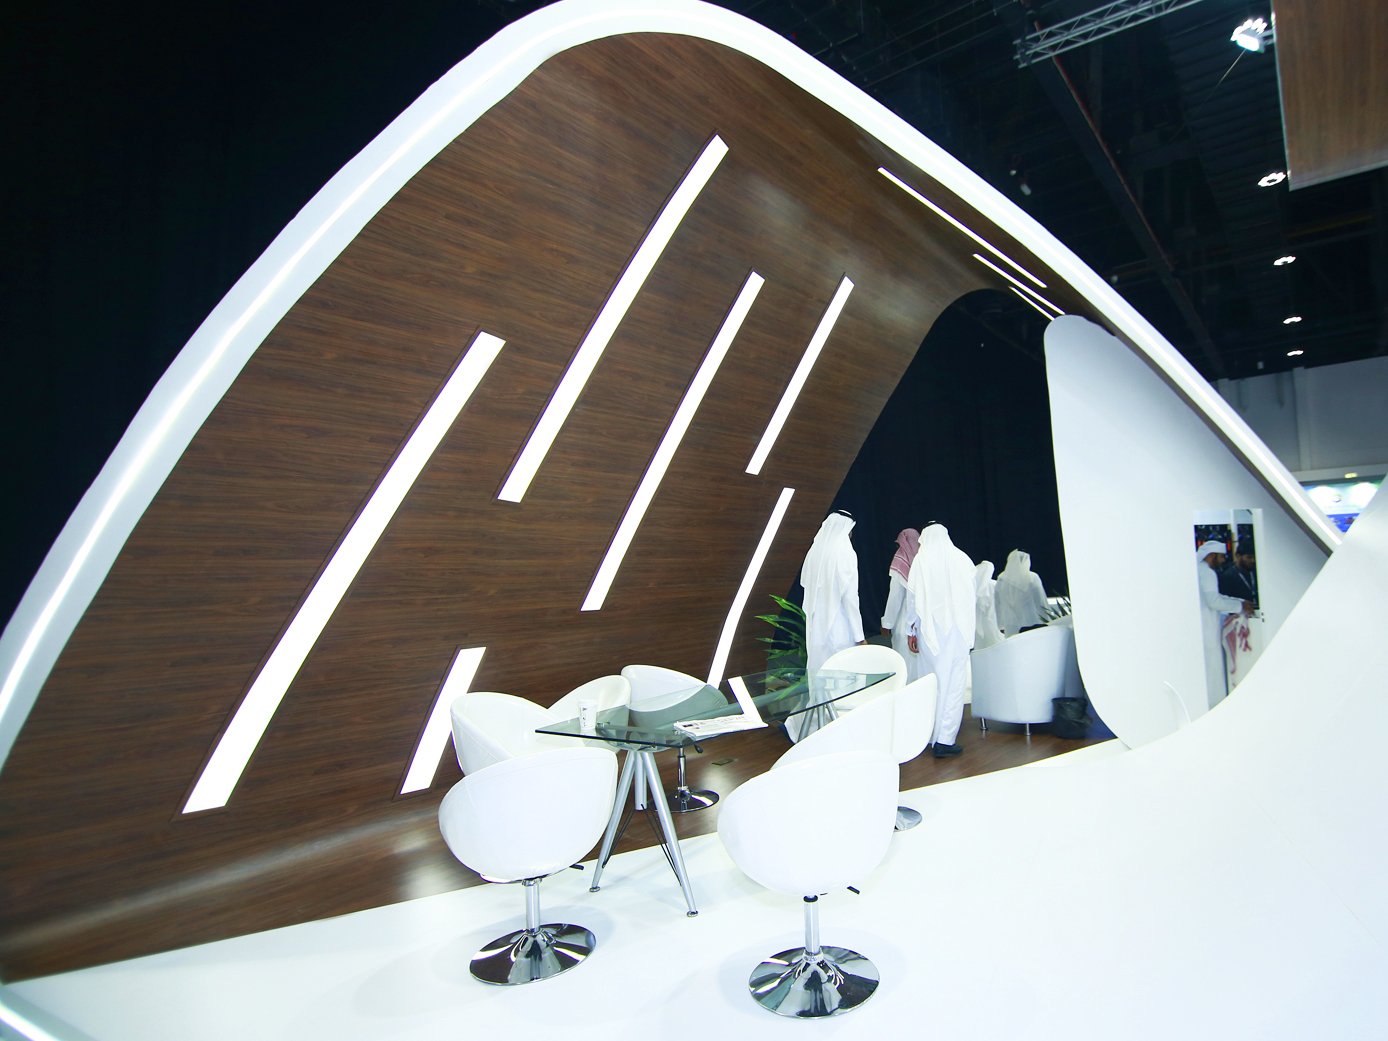 The negotiation area exhibition stand